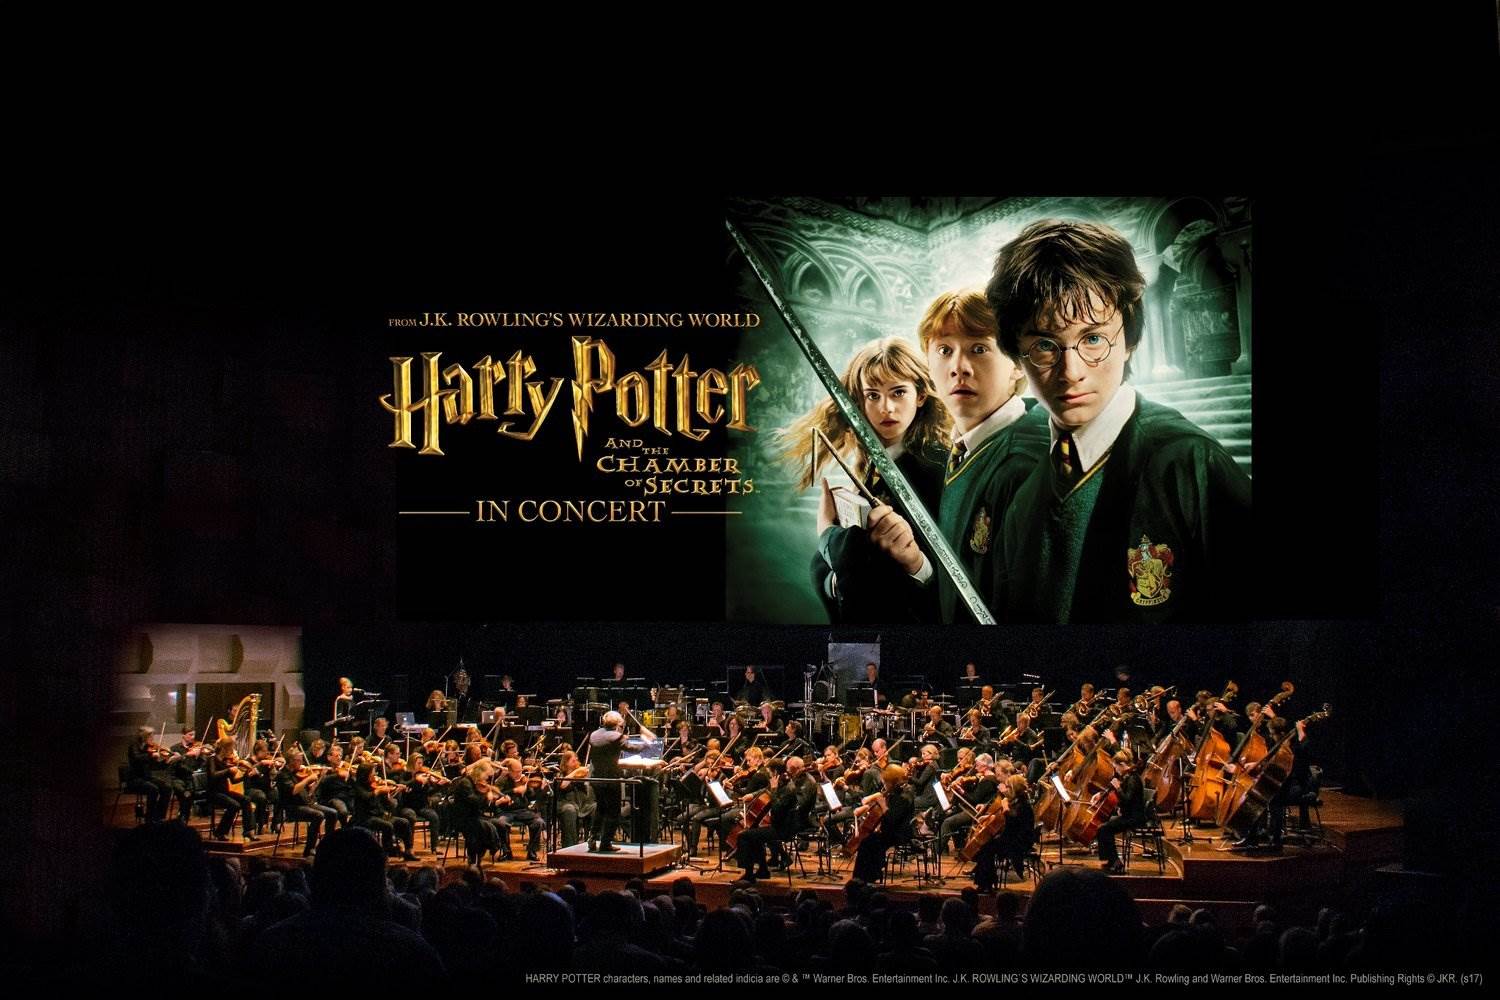 Harry Potter and the Chamber of Secrets In Concert